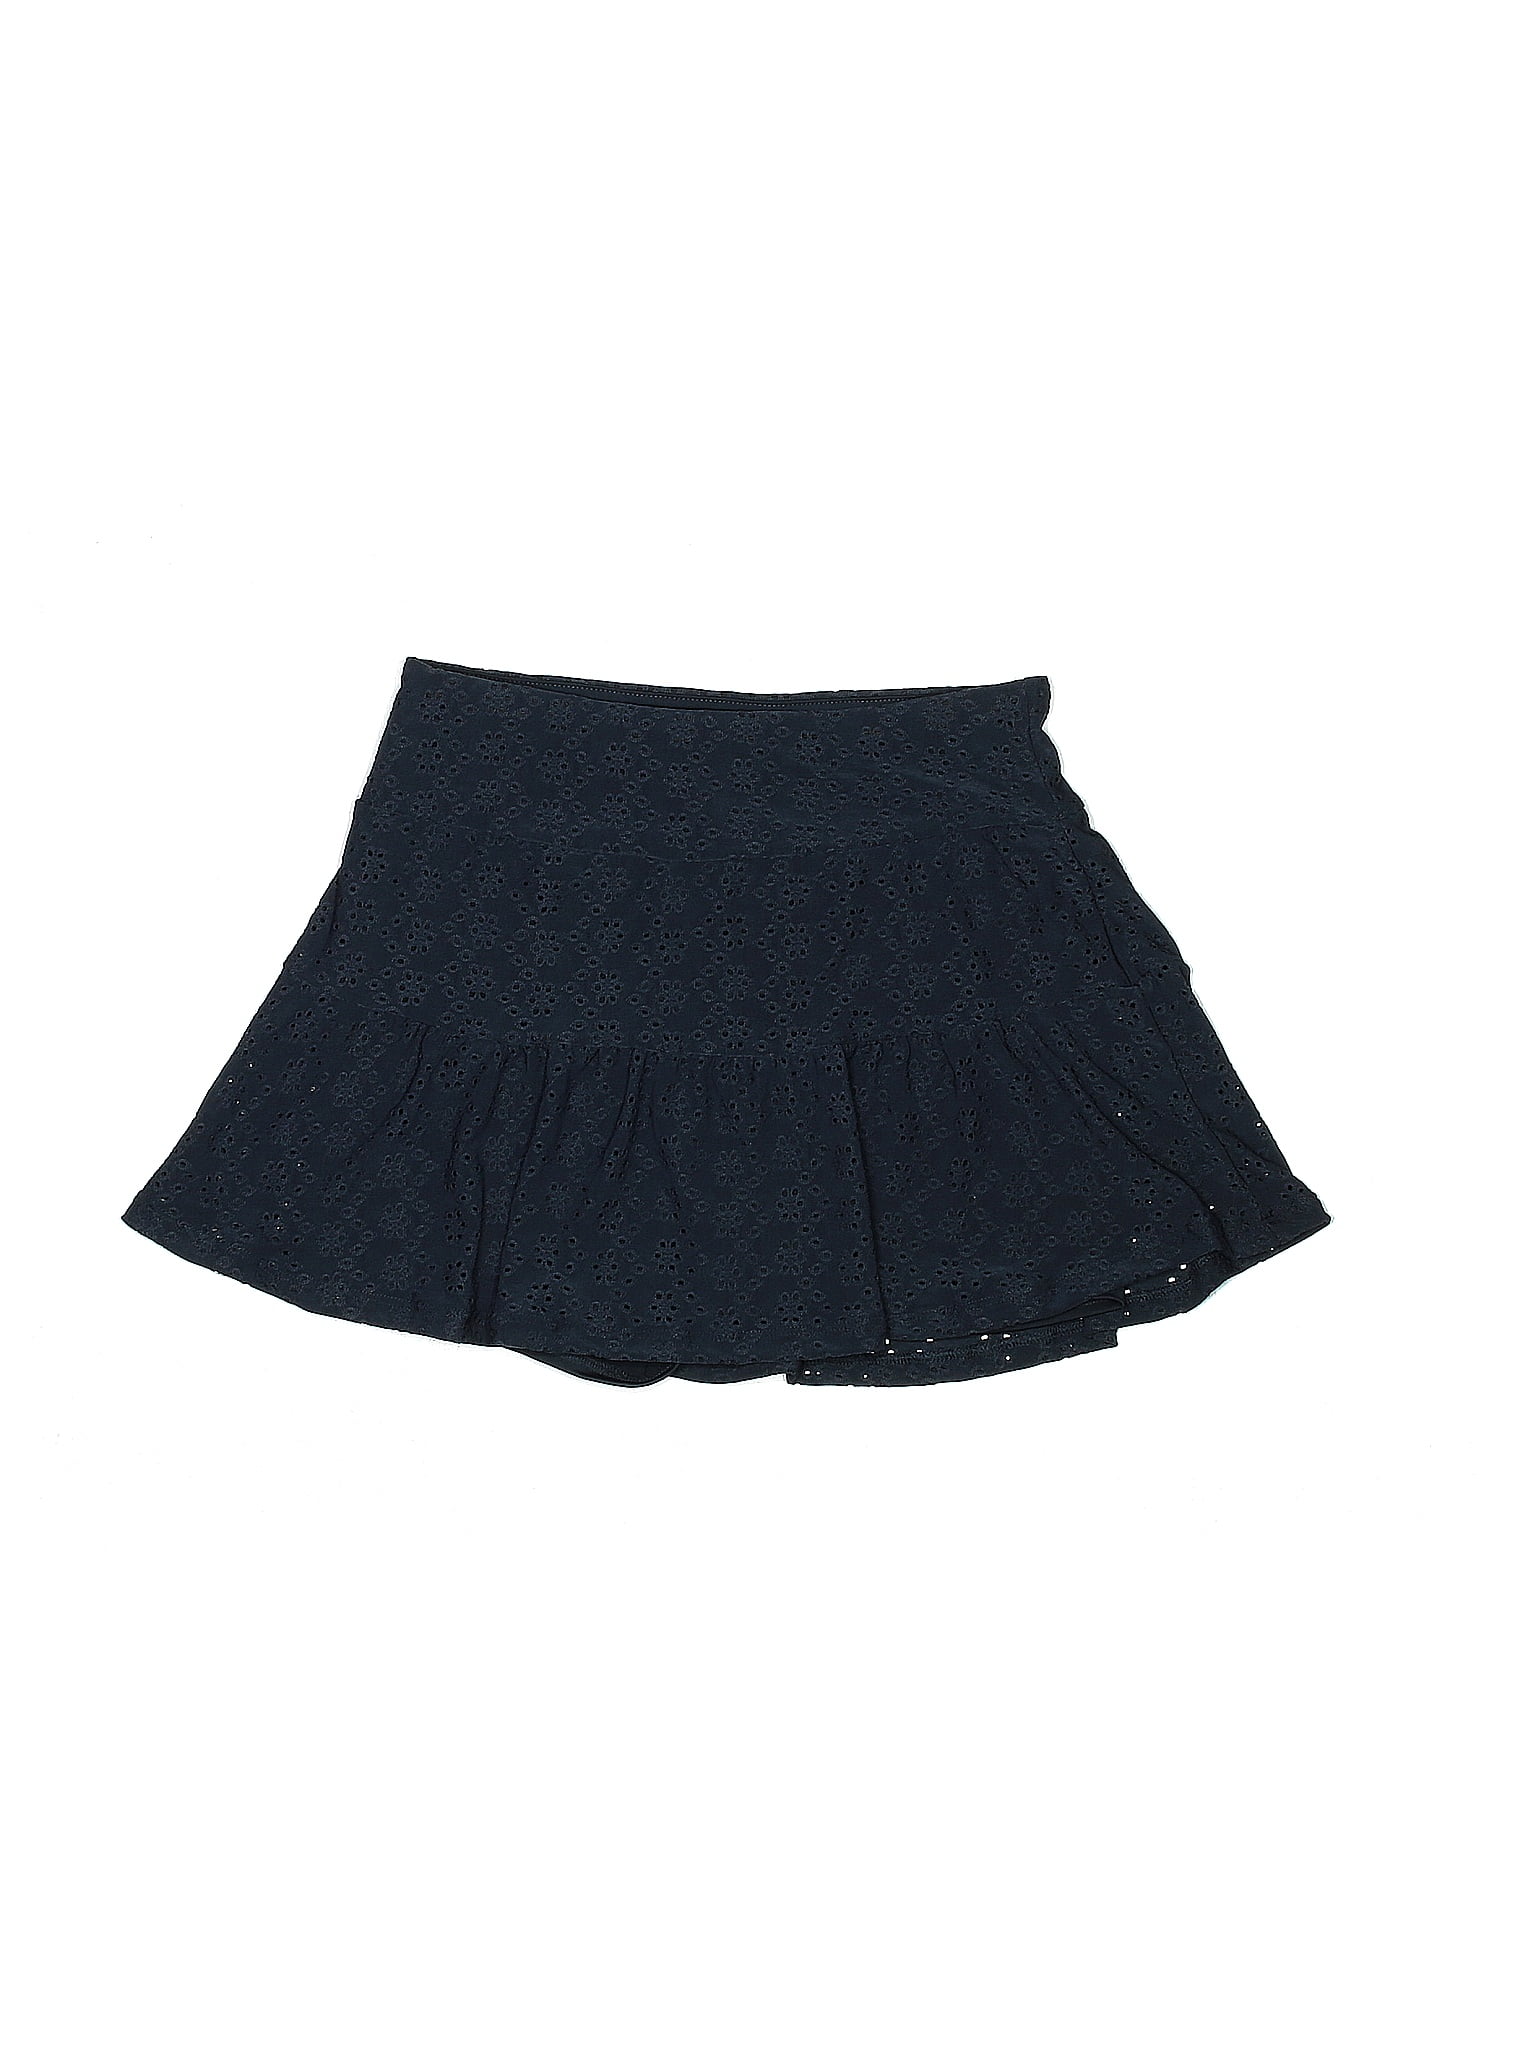 Kyodan Solid Navy Blue Casual Skirt Size S - 47% off